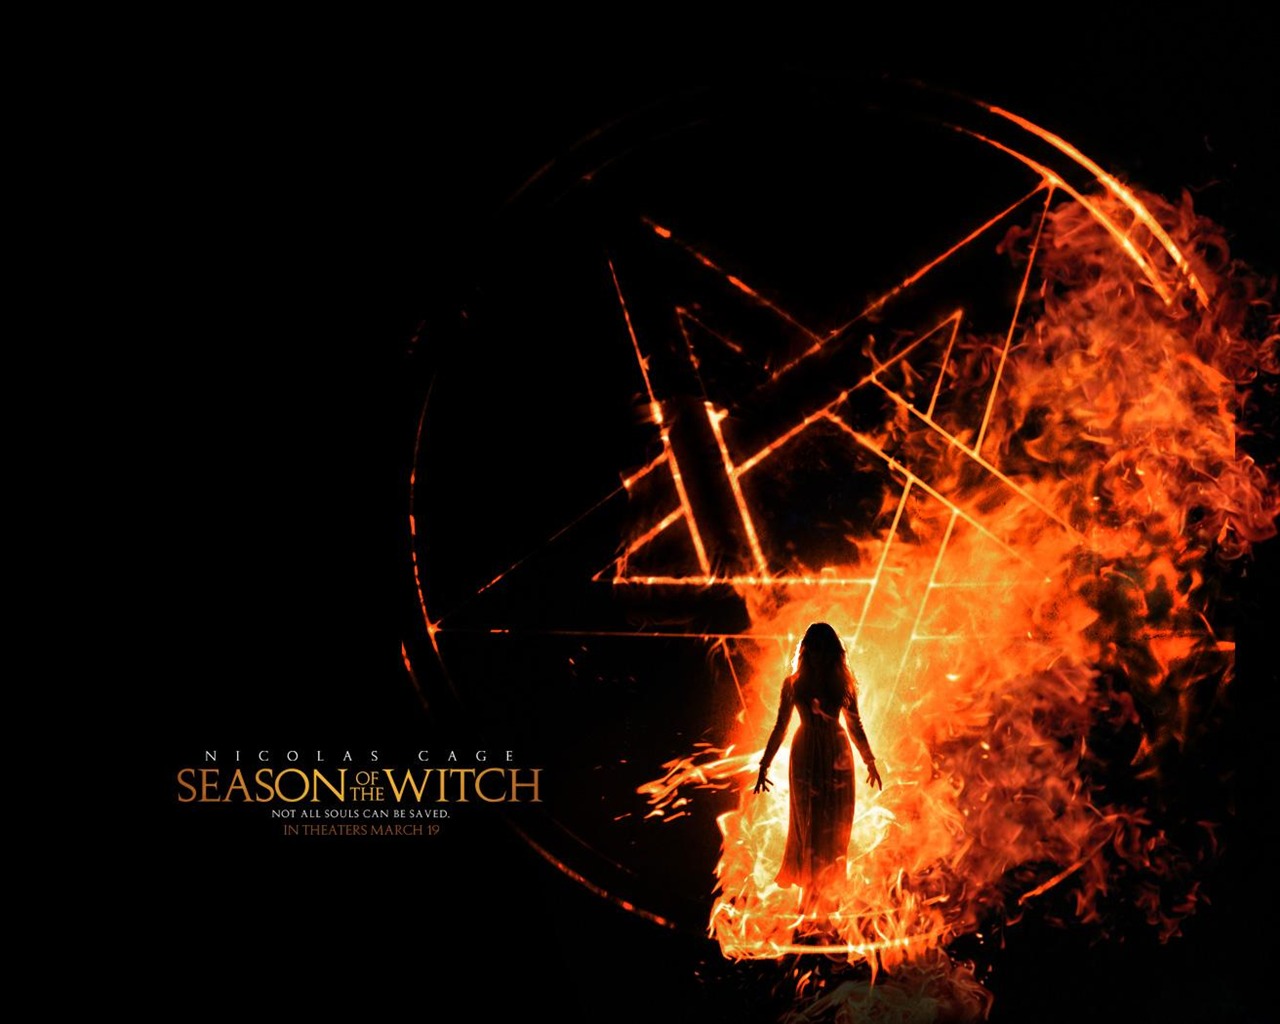 Season of the Witch 女巫季節 壁紙專輯 #37 - 1280x1024